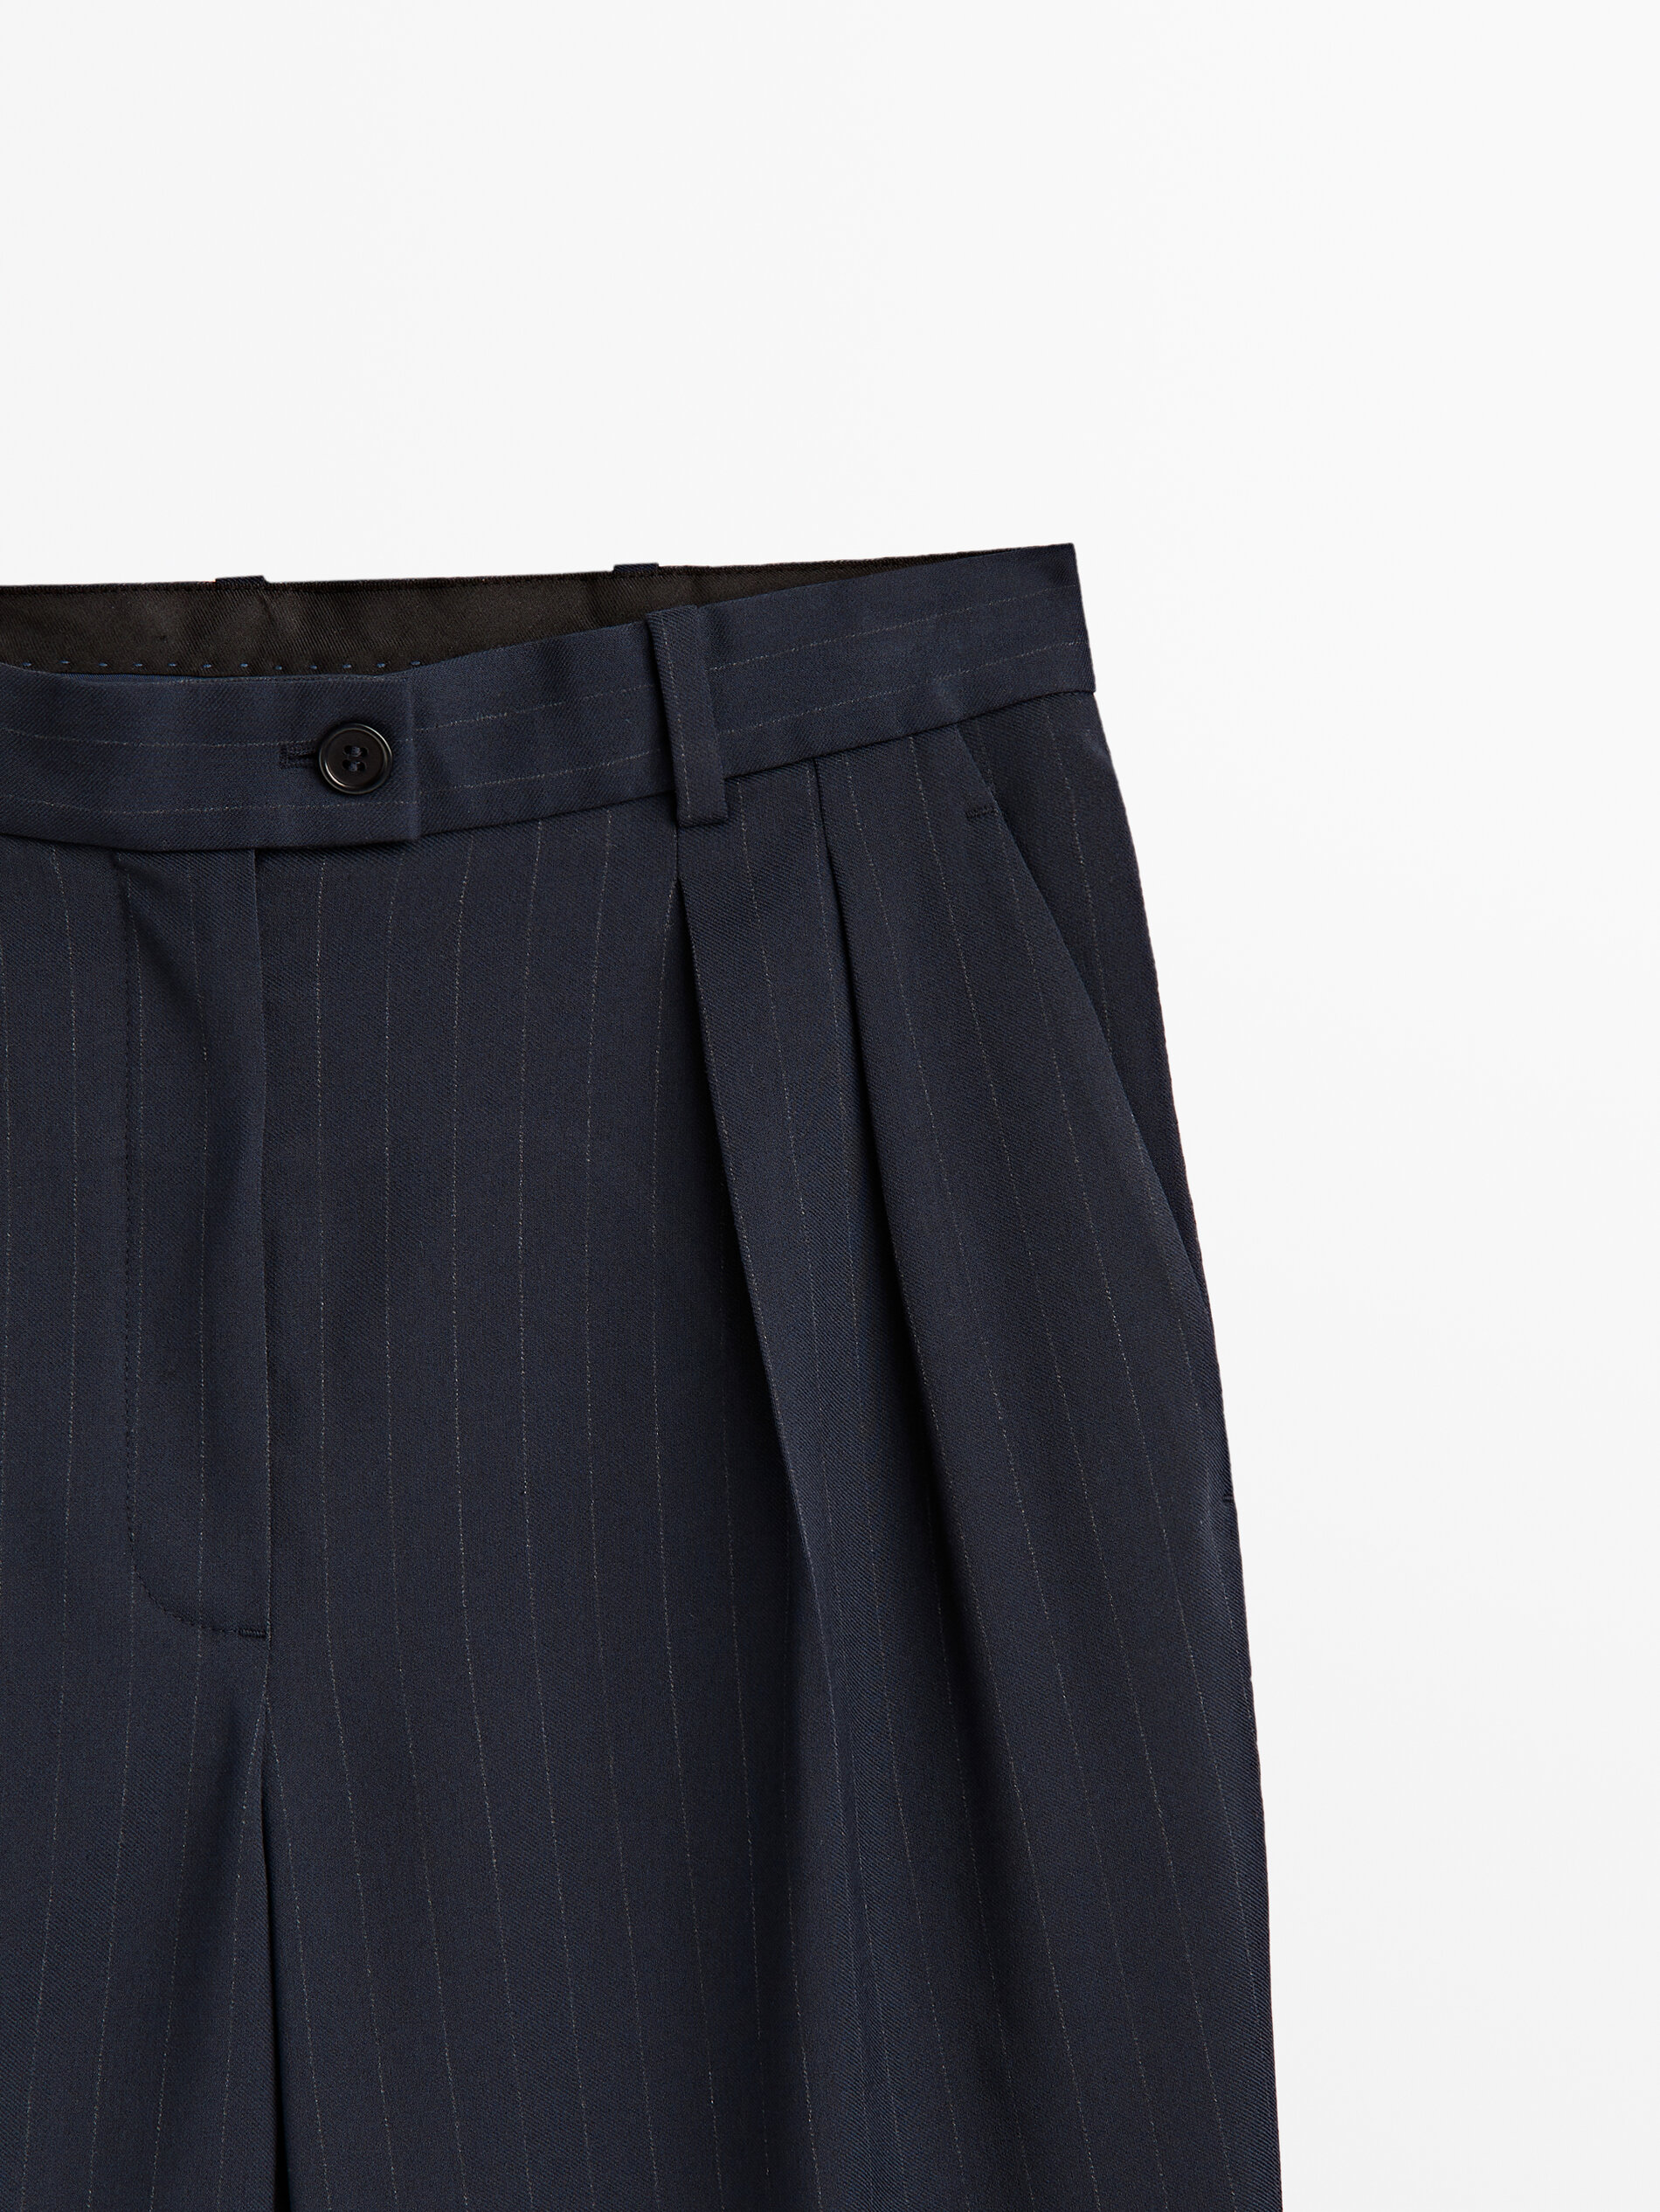 Massimo Dutti Pinstriped Darted Suit Trousers - Big Apple Buddy